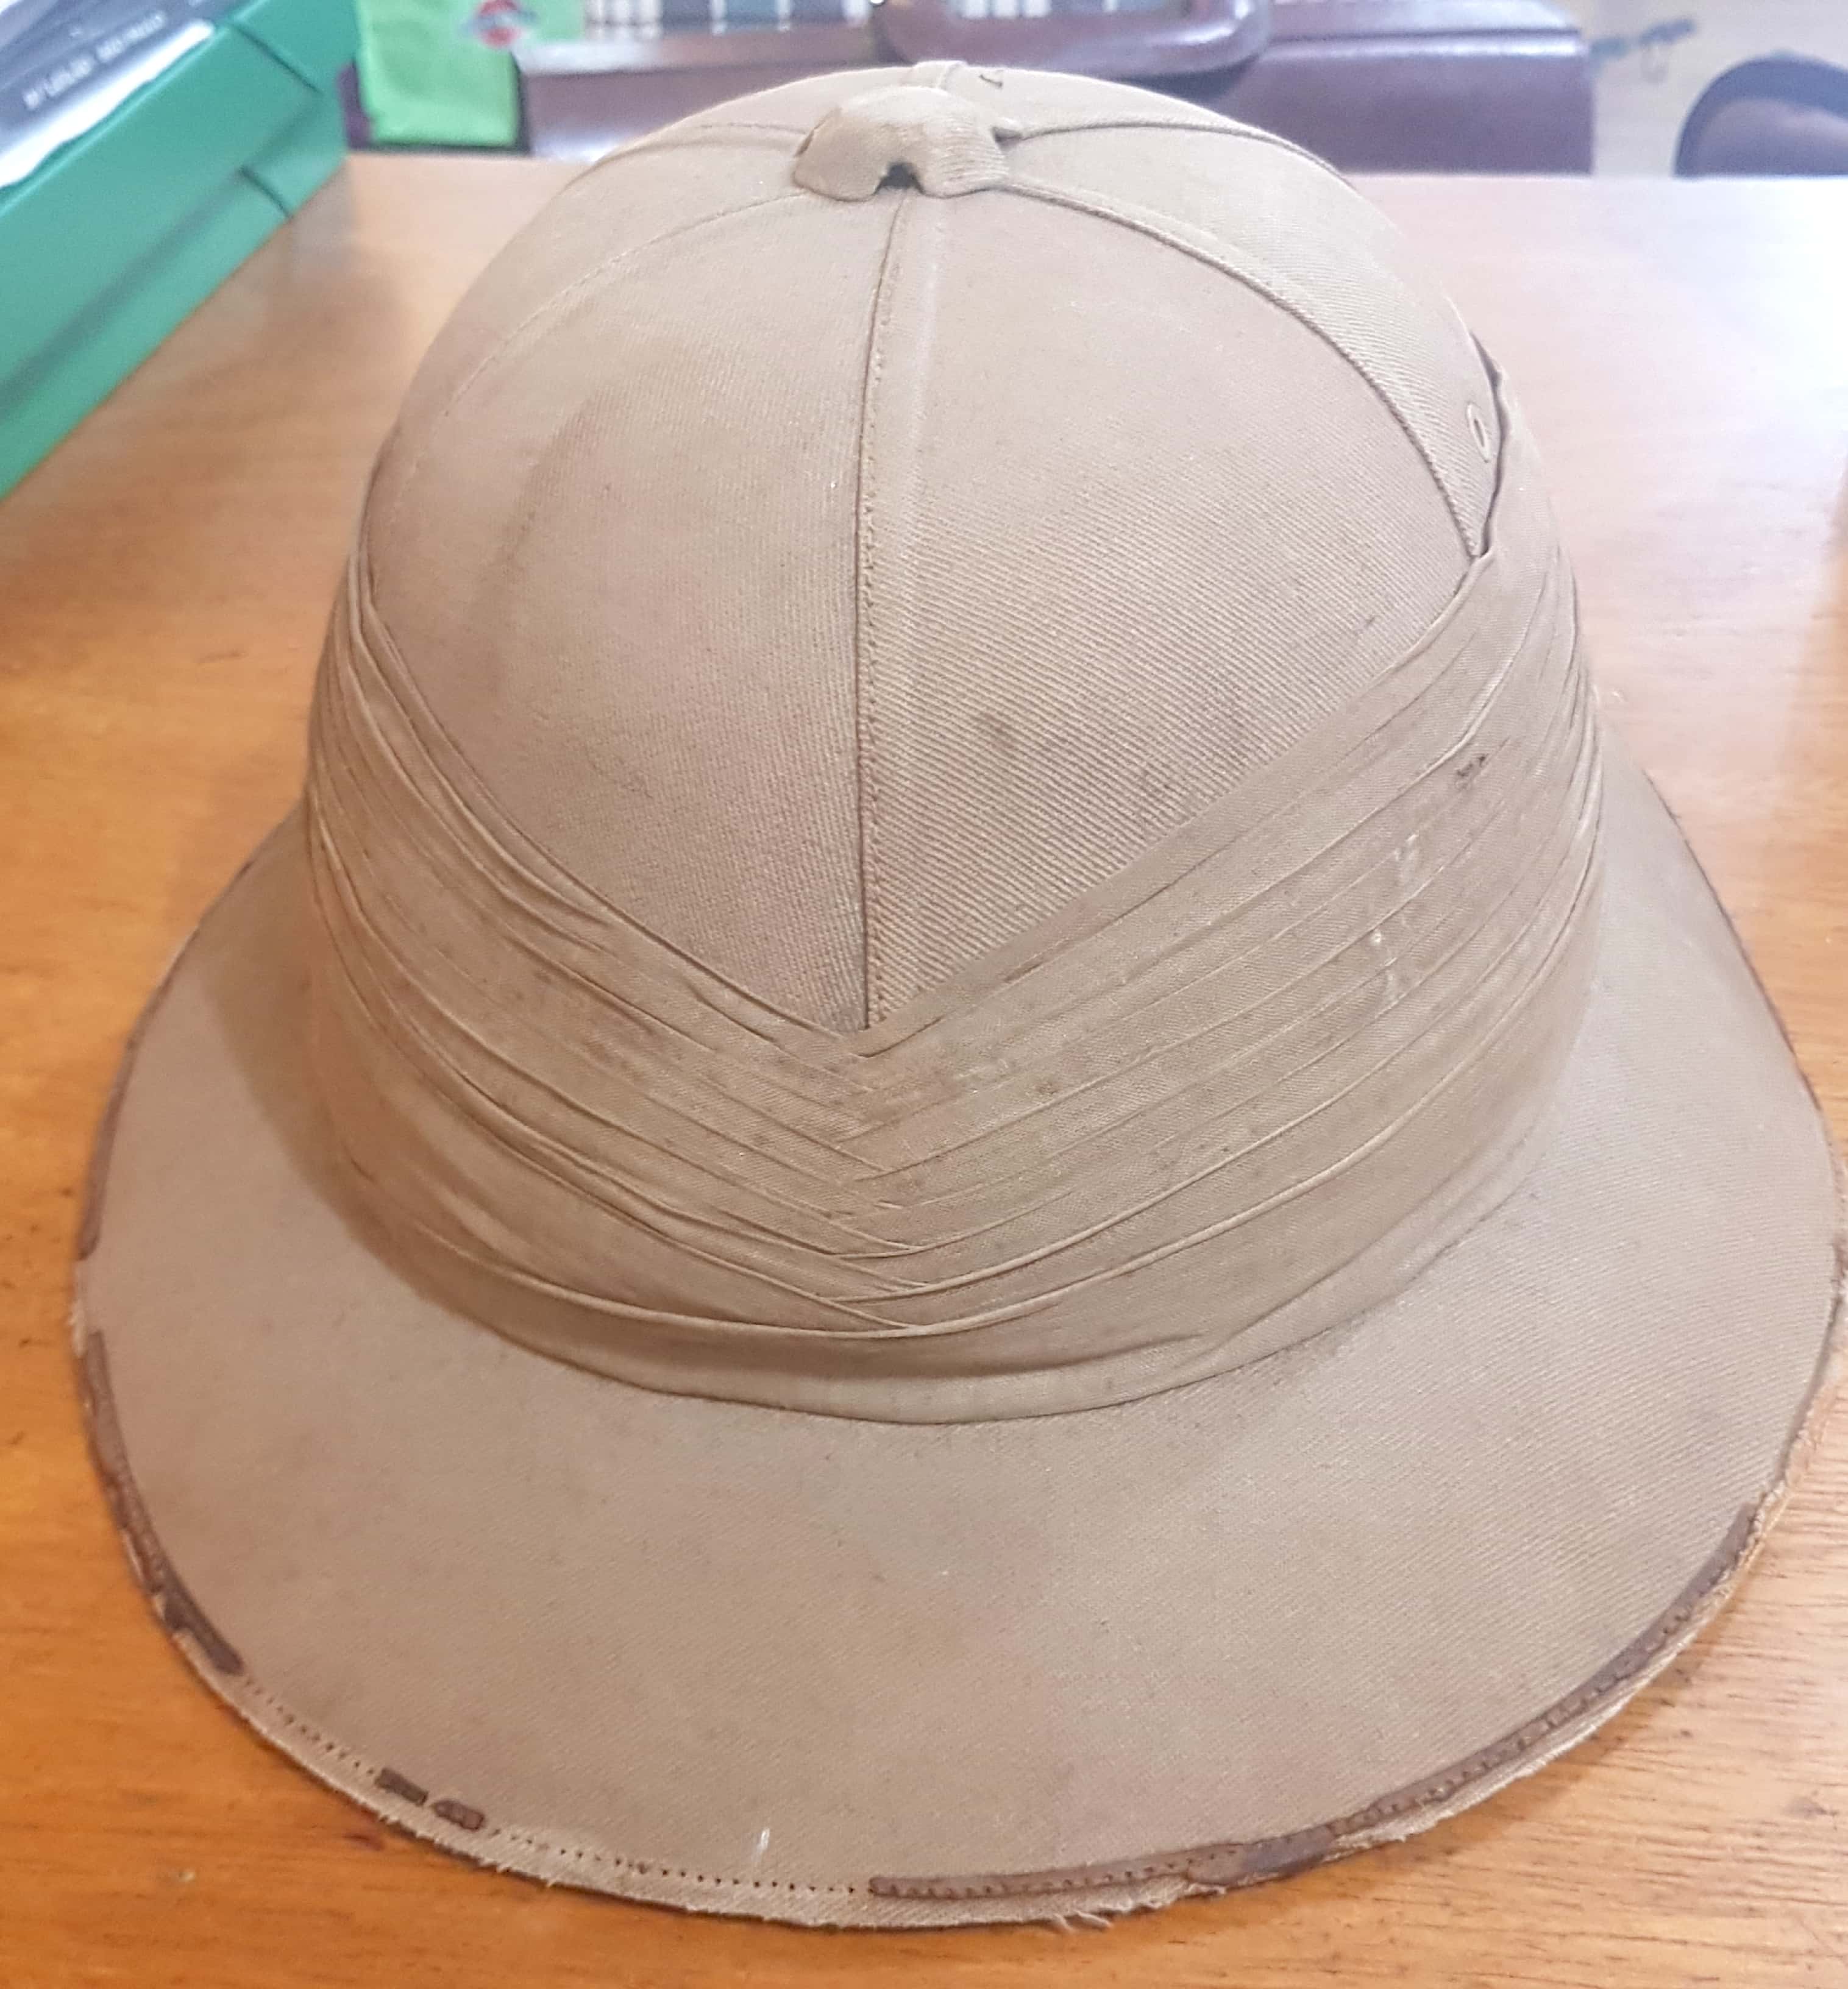 British pith helmet - Info needed. | Antiques Board